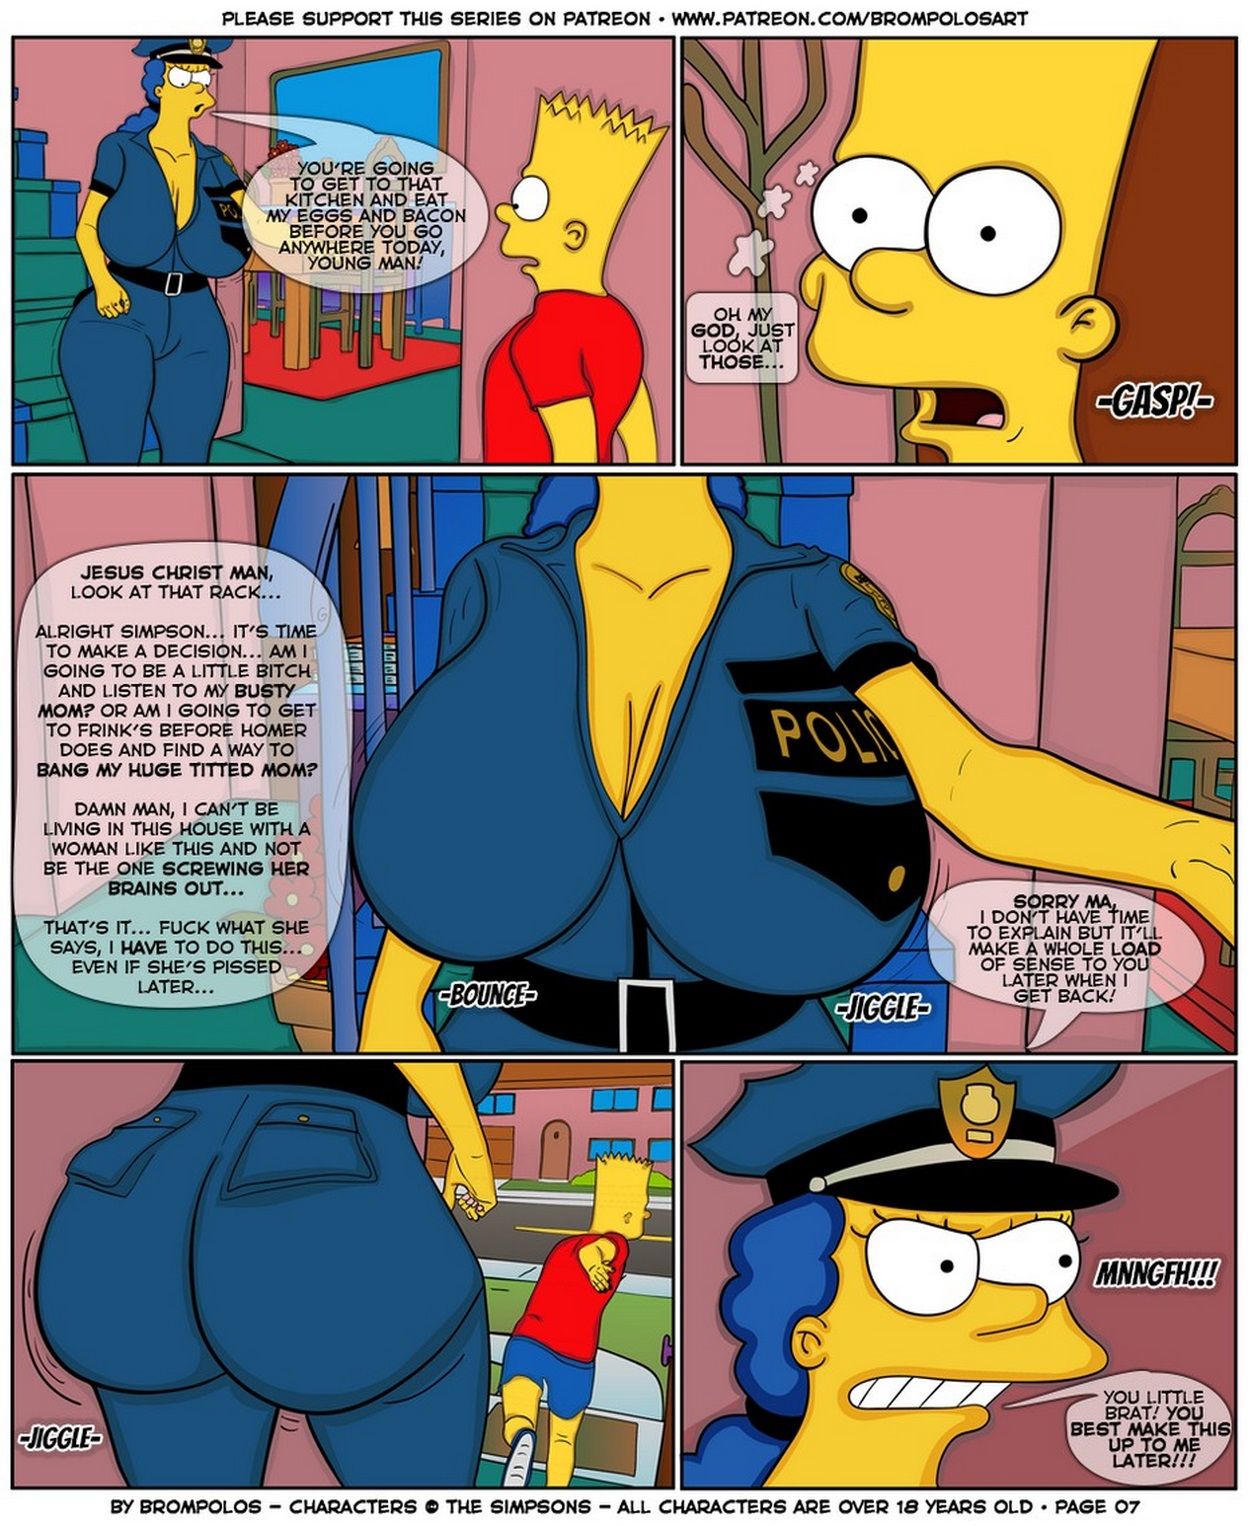 Brompolos - The Simpsons are Sexenteins page 14